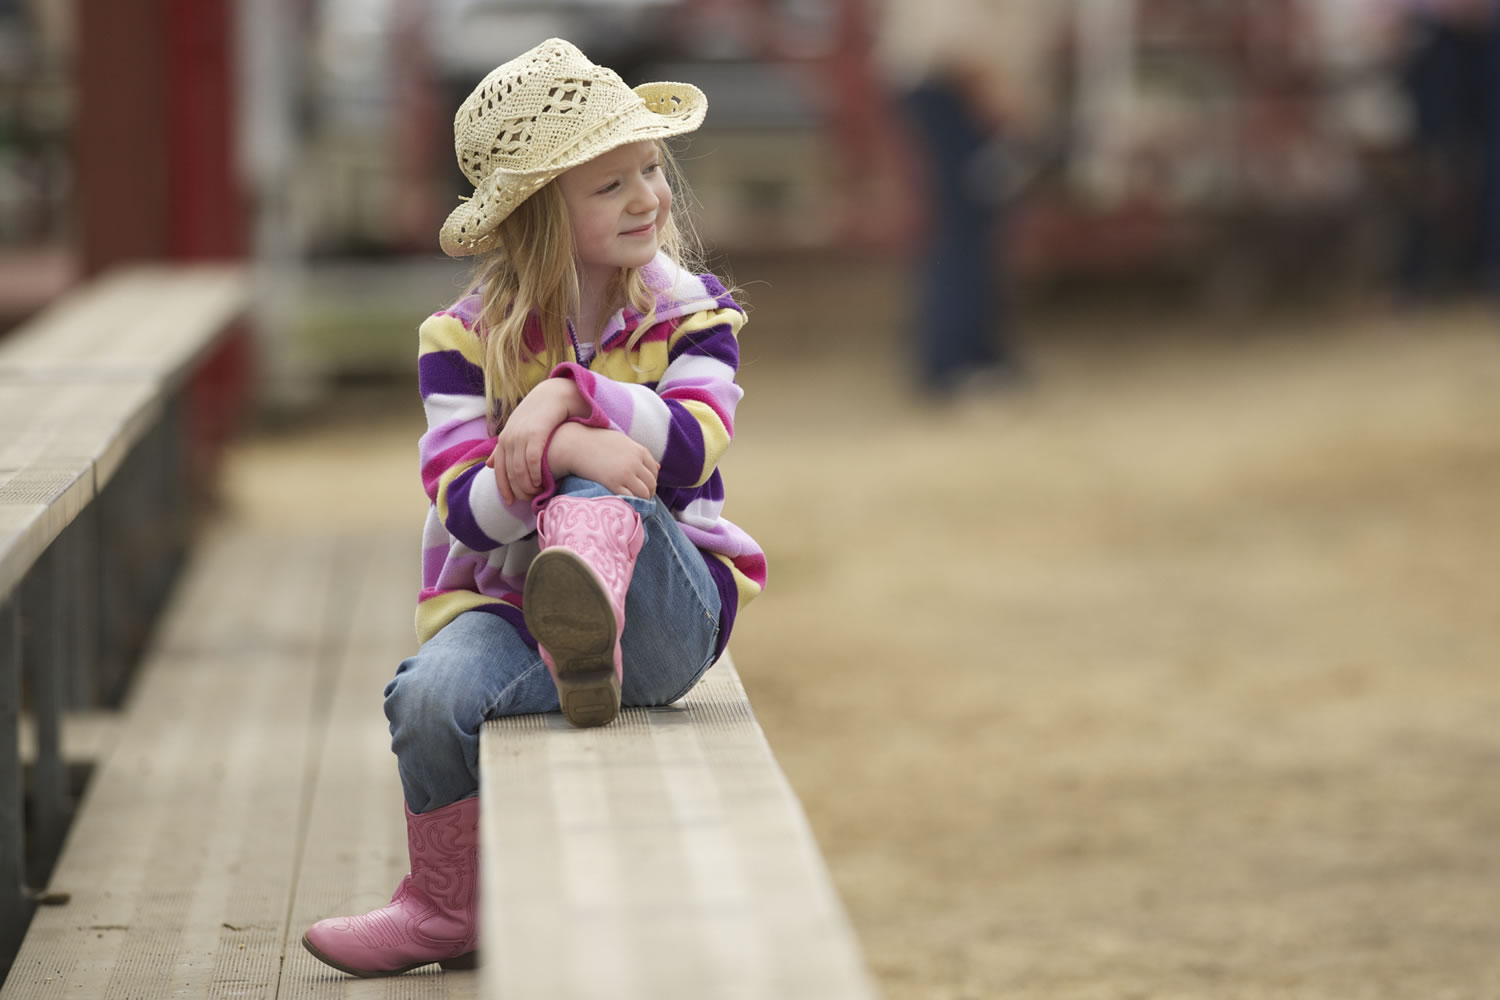 Photos by Steven Lane/The Columbian
Izzy Isenstein, 5, from Milwaukie, Ore., watches the Saturday morning action at the Vancouver Rodeo.